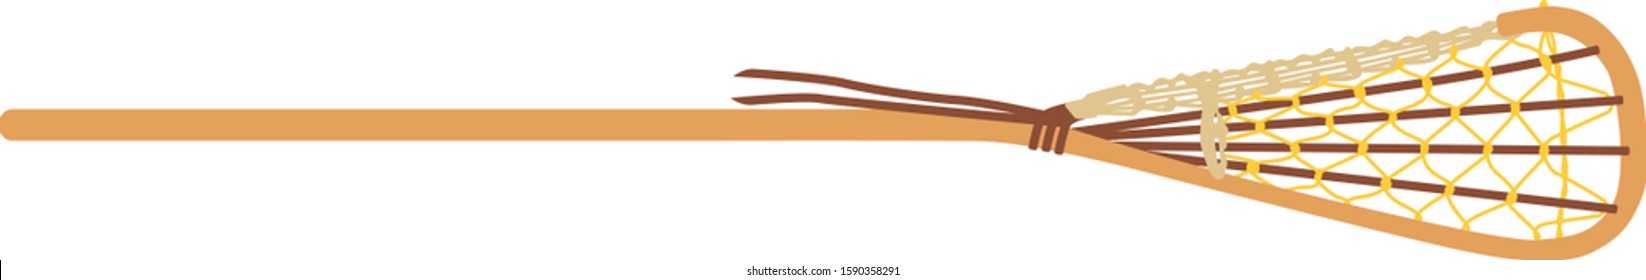 A vector of a Native American style lacrosse stick.